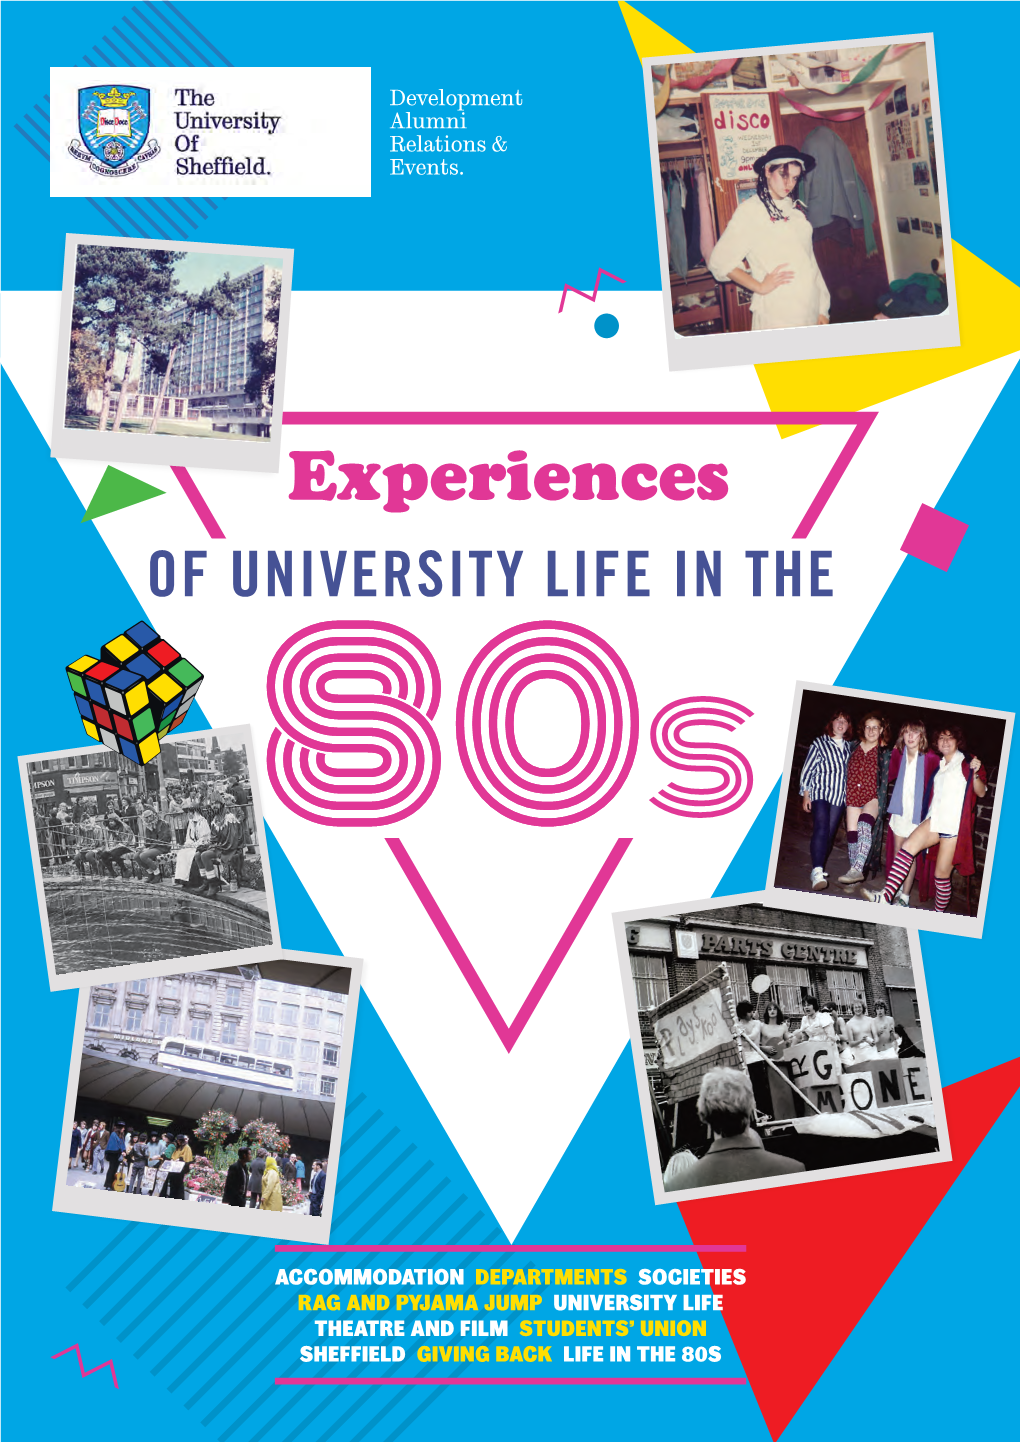 Experiences of UNIVERSITY LIFE in THE